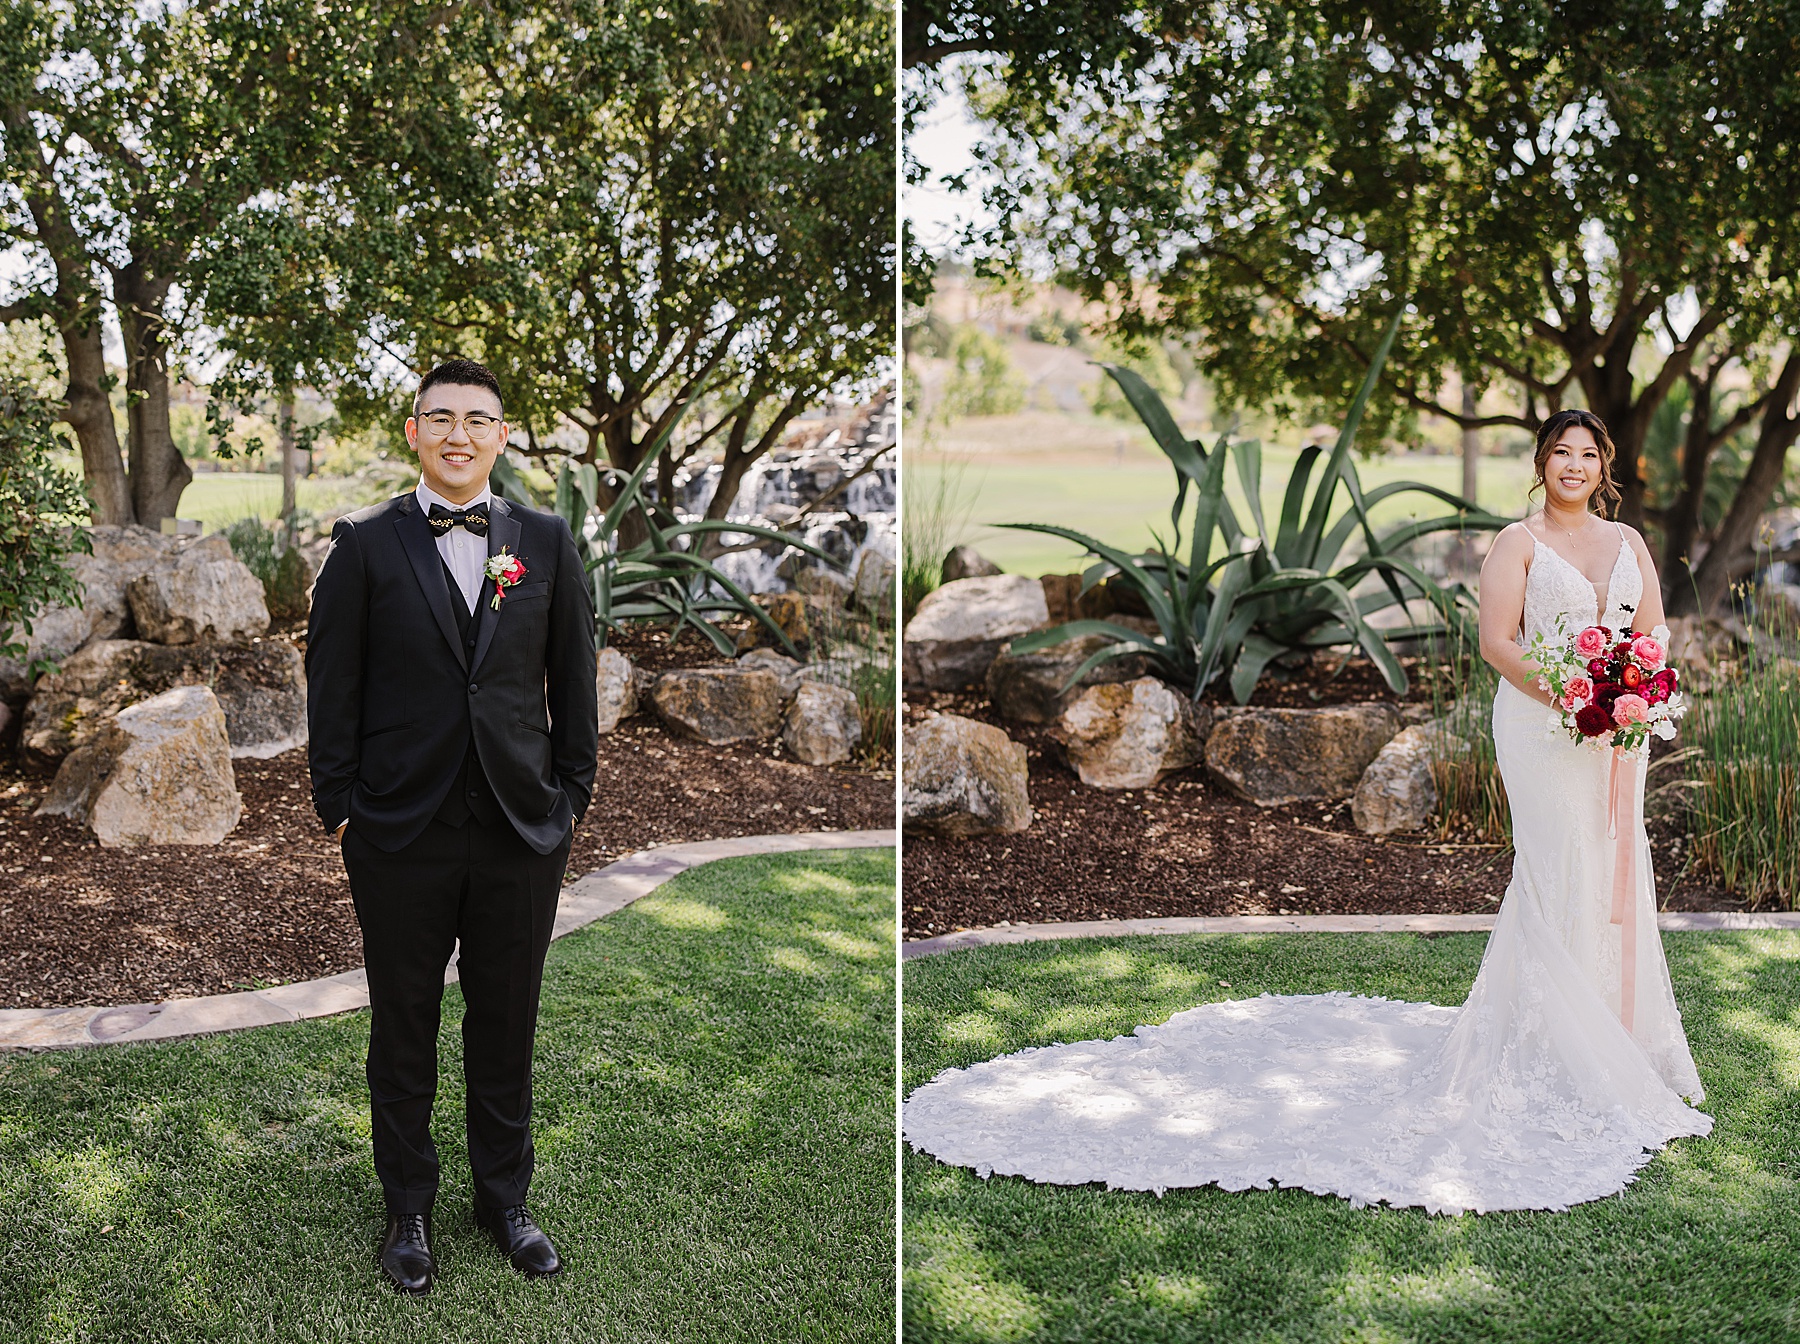 Nikkels Photography, a California wedding photographer, shares inspiration from this San Jose Chic Wedding that she captured.